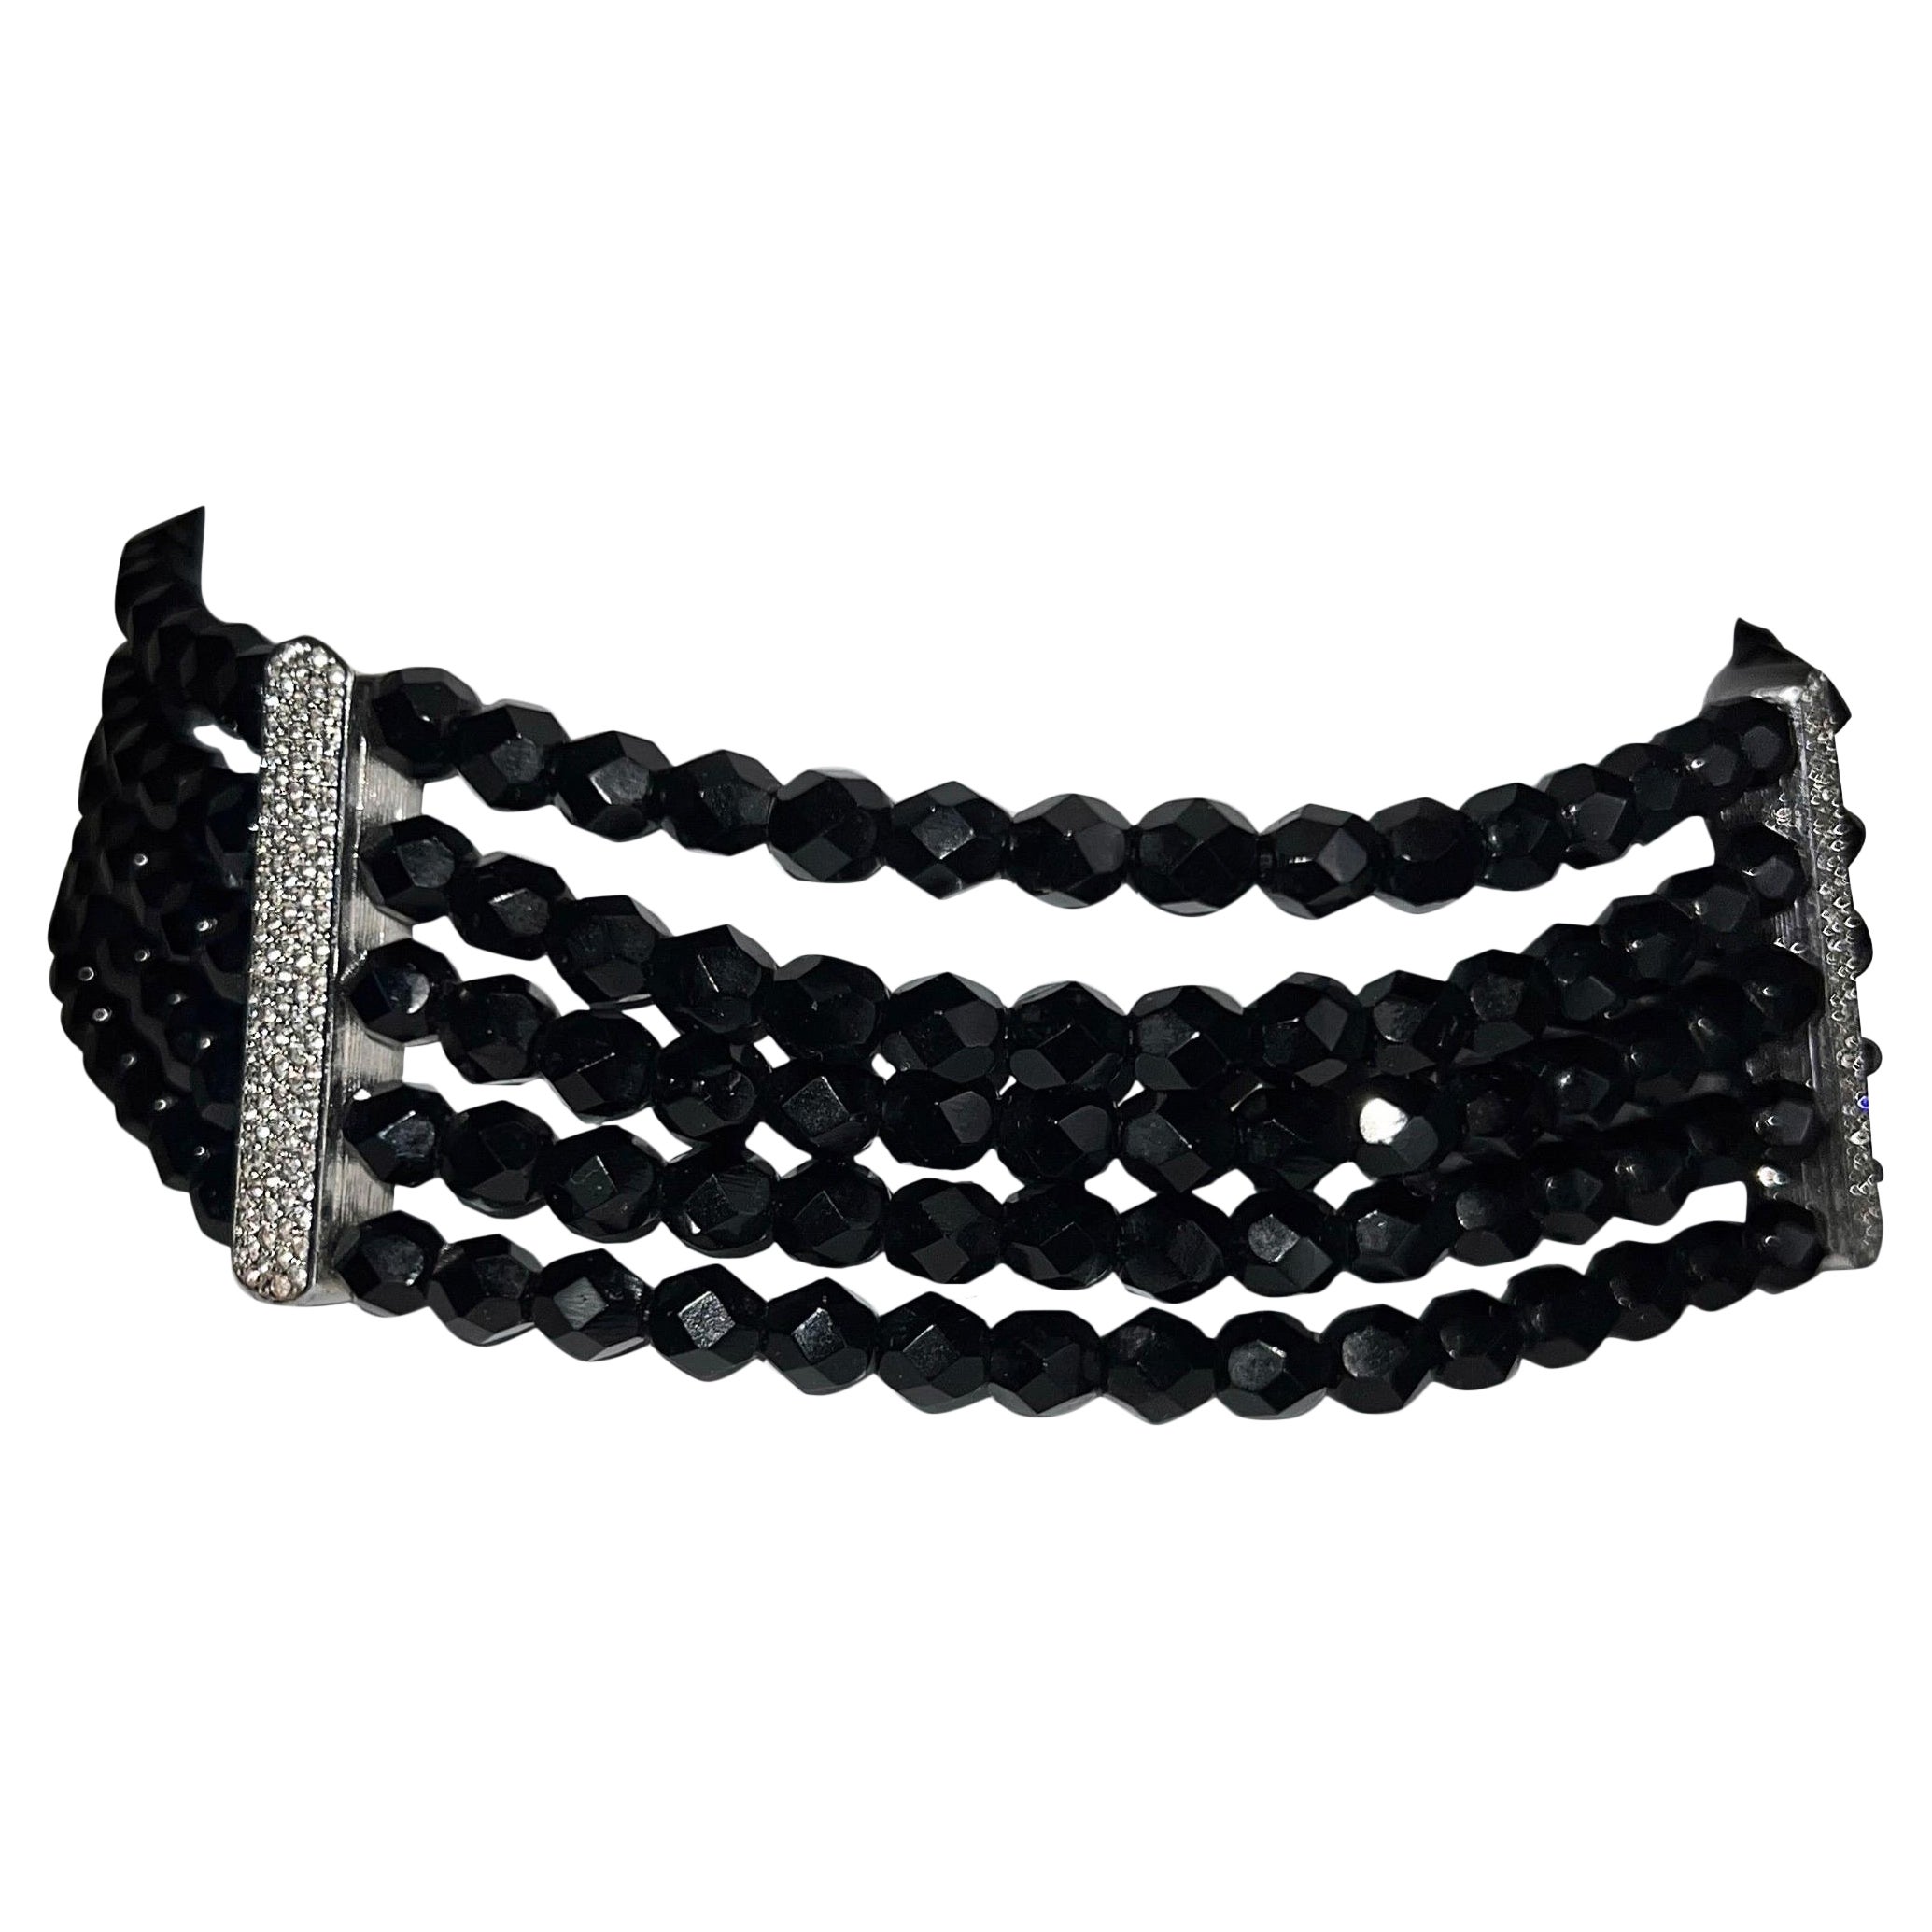 Dior by John Galliano c. 1999 Multistrand Black Choker with Pavé Hardware For Sale